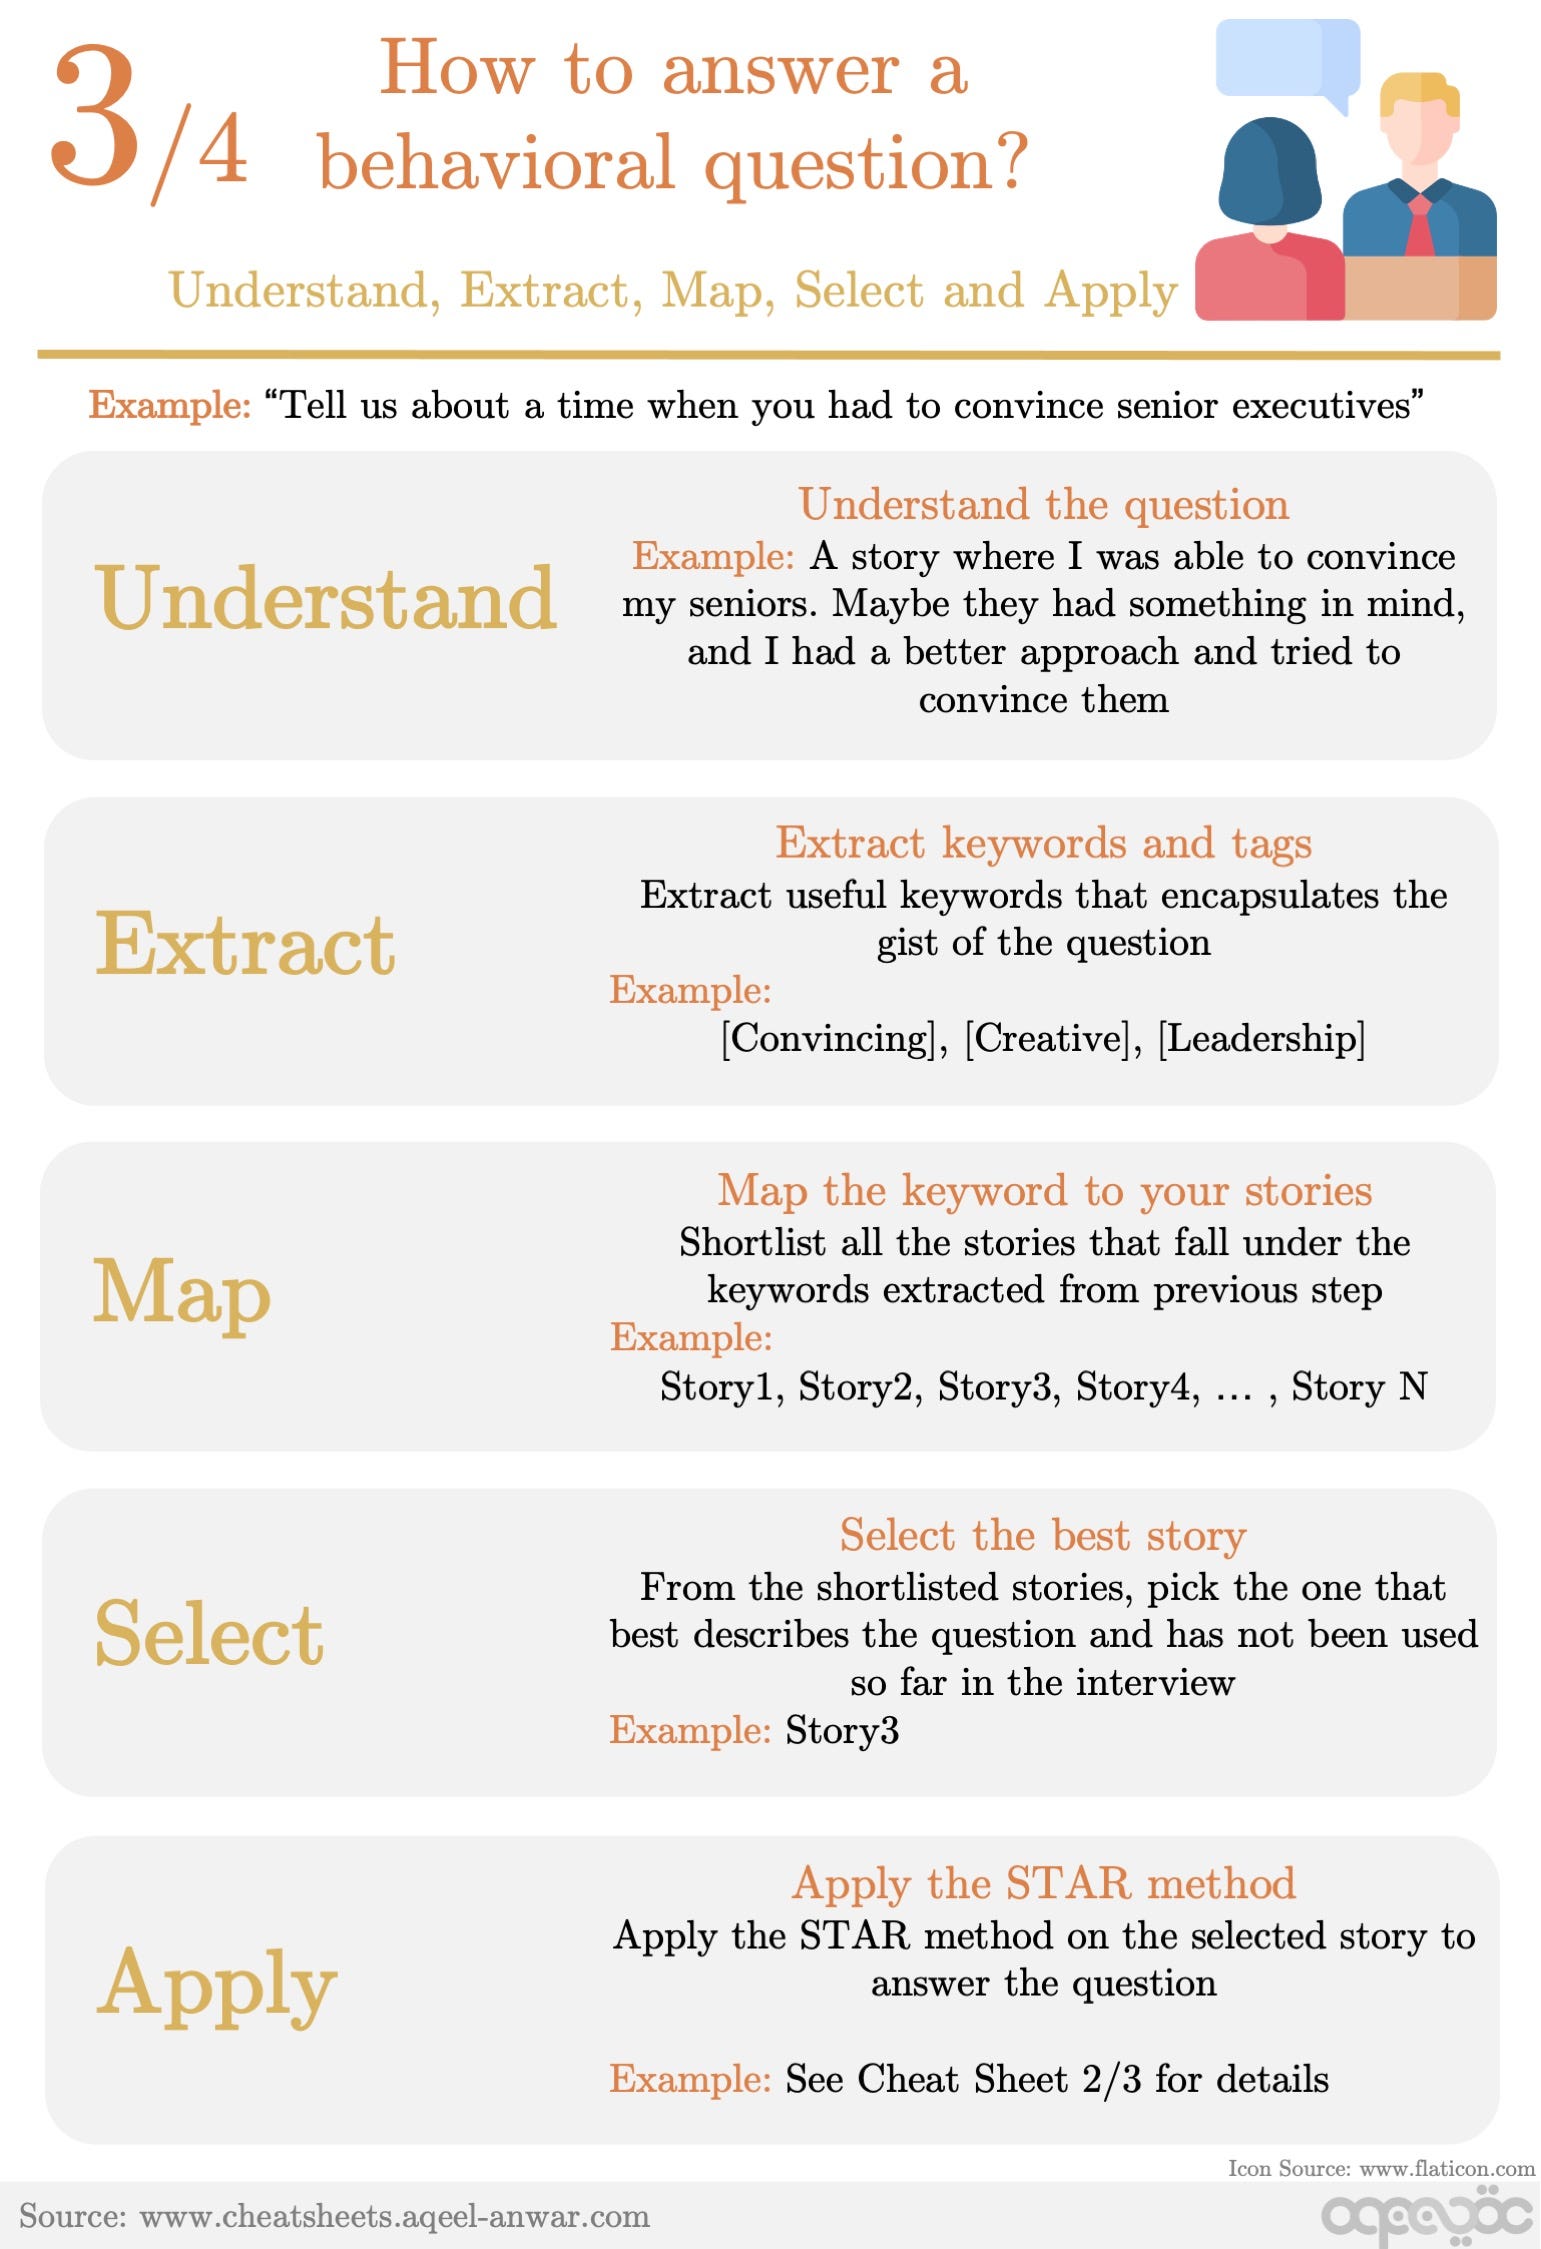 What to Include on Your Interview Cheat Sheet